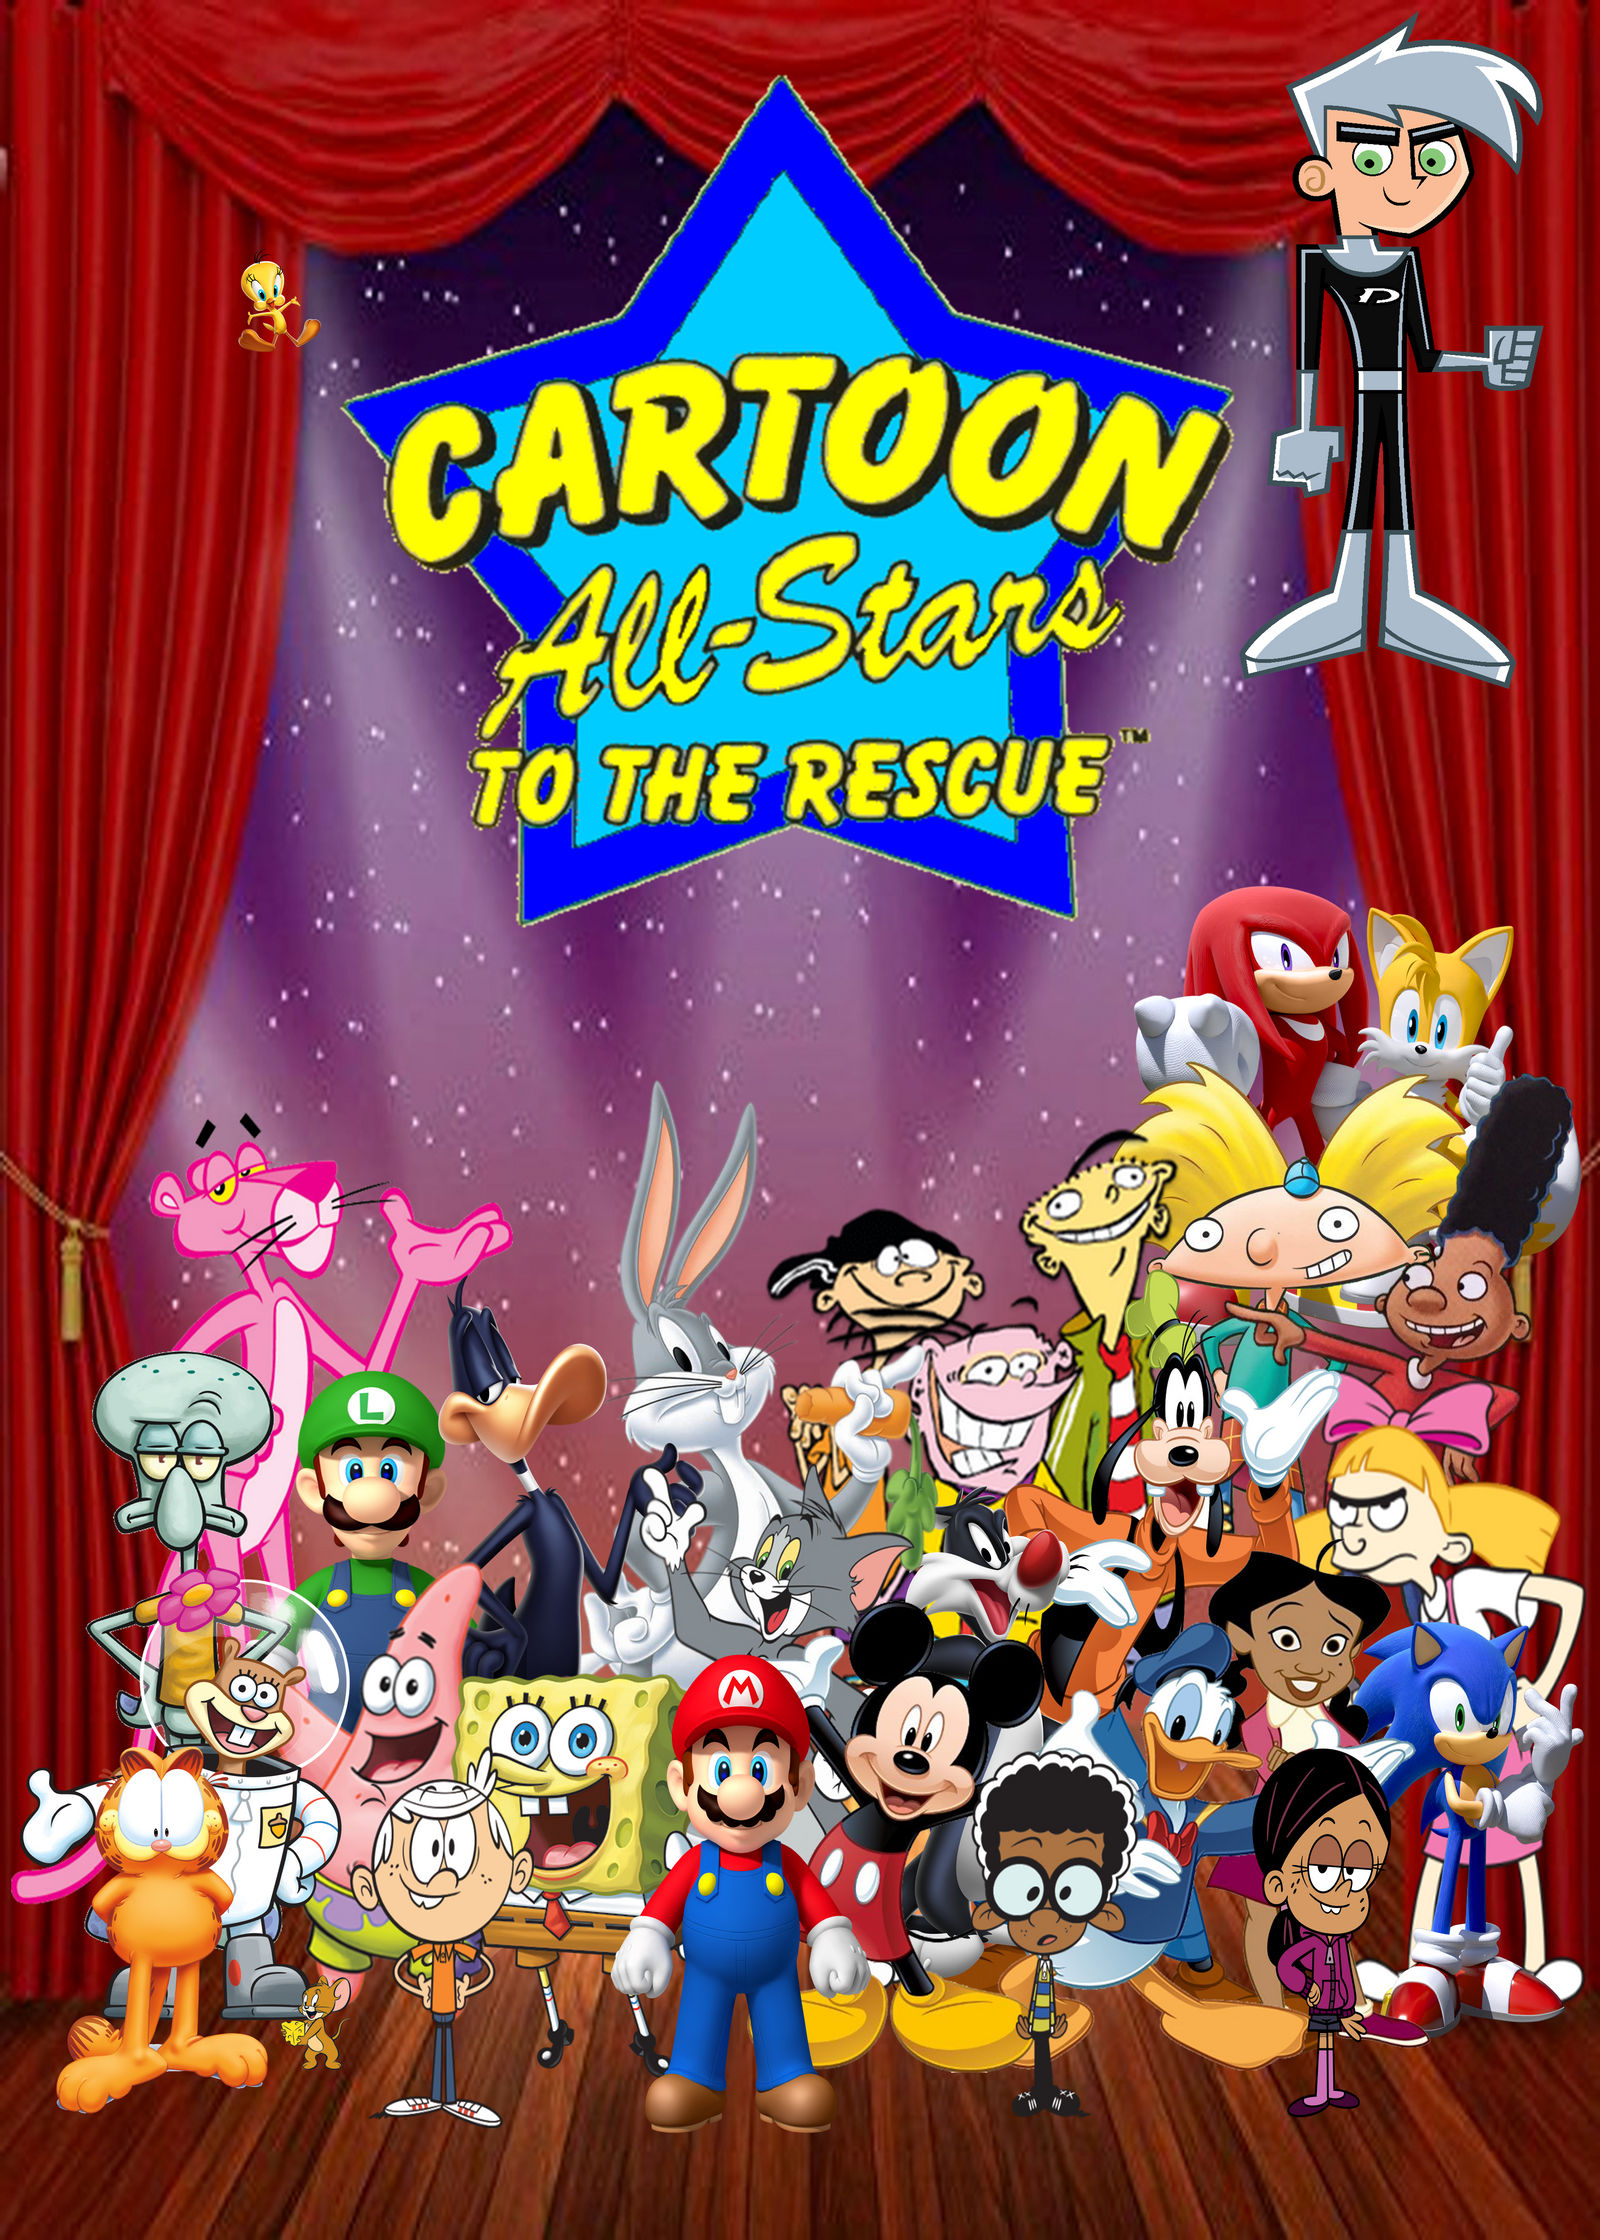 Cartoon All-Stars to the Rescue (My Version) by aaronhardy523 on DeviantArt